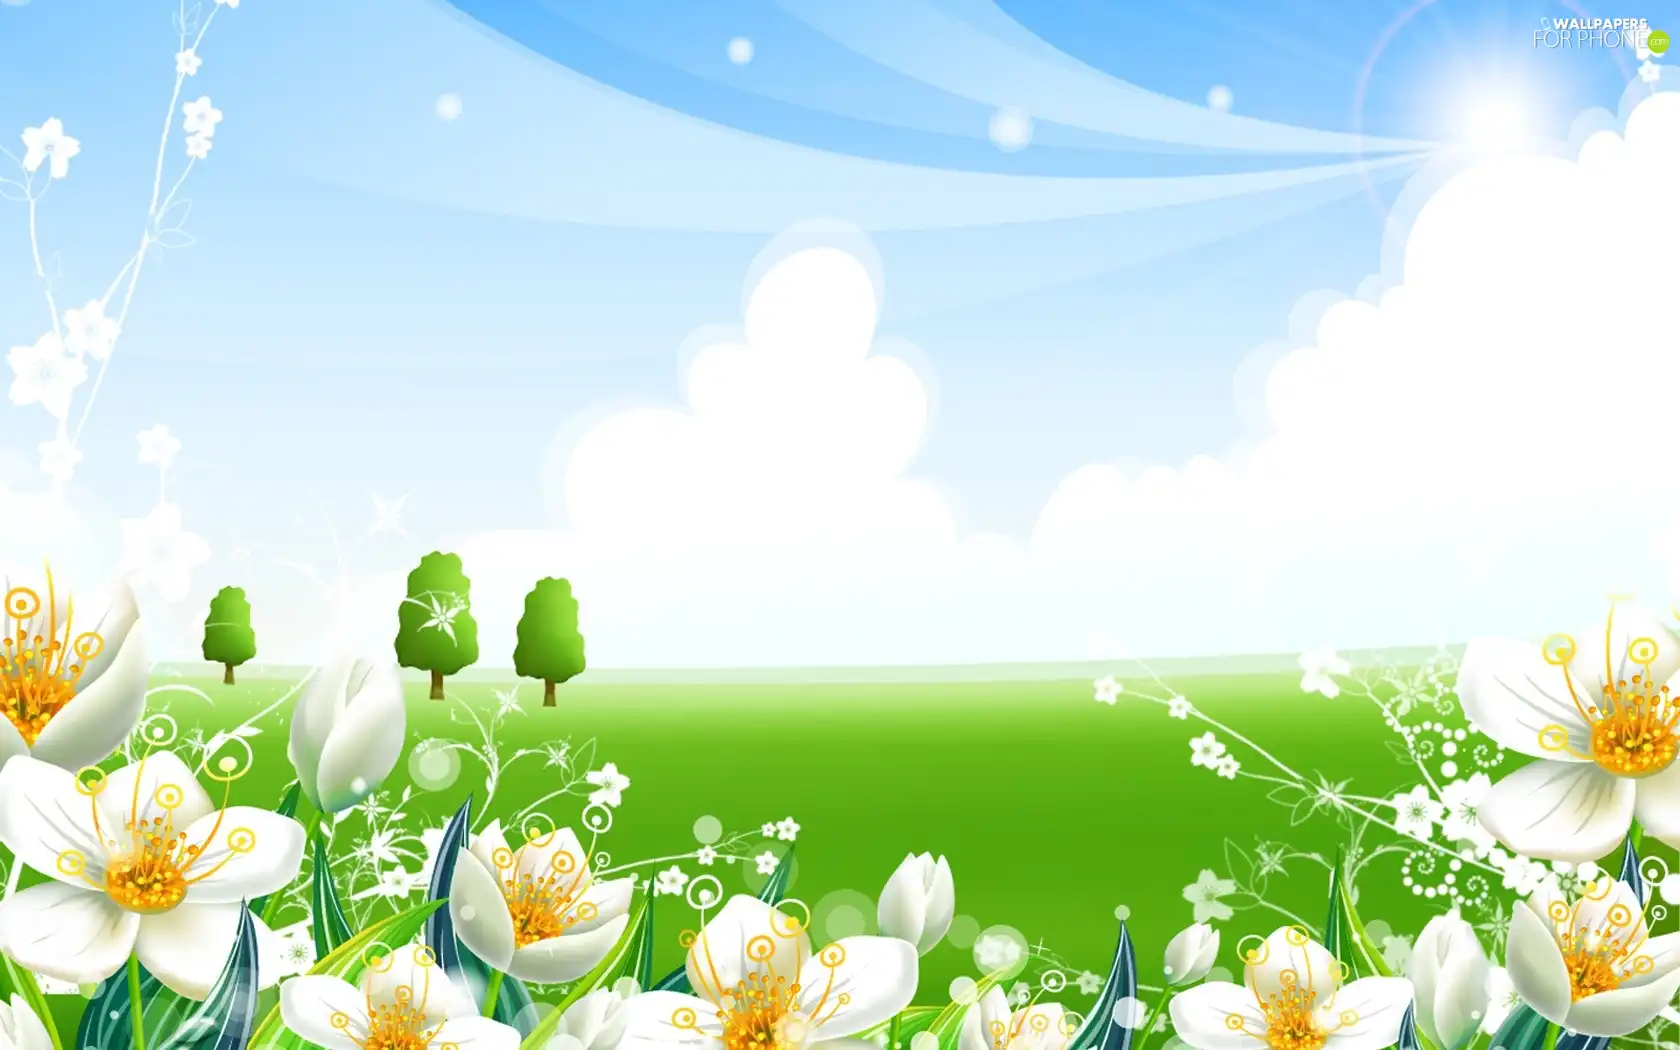 Flowers, viewes, grass, trees